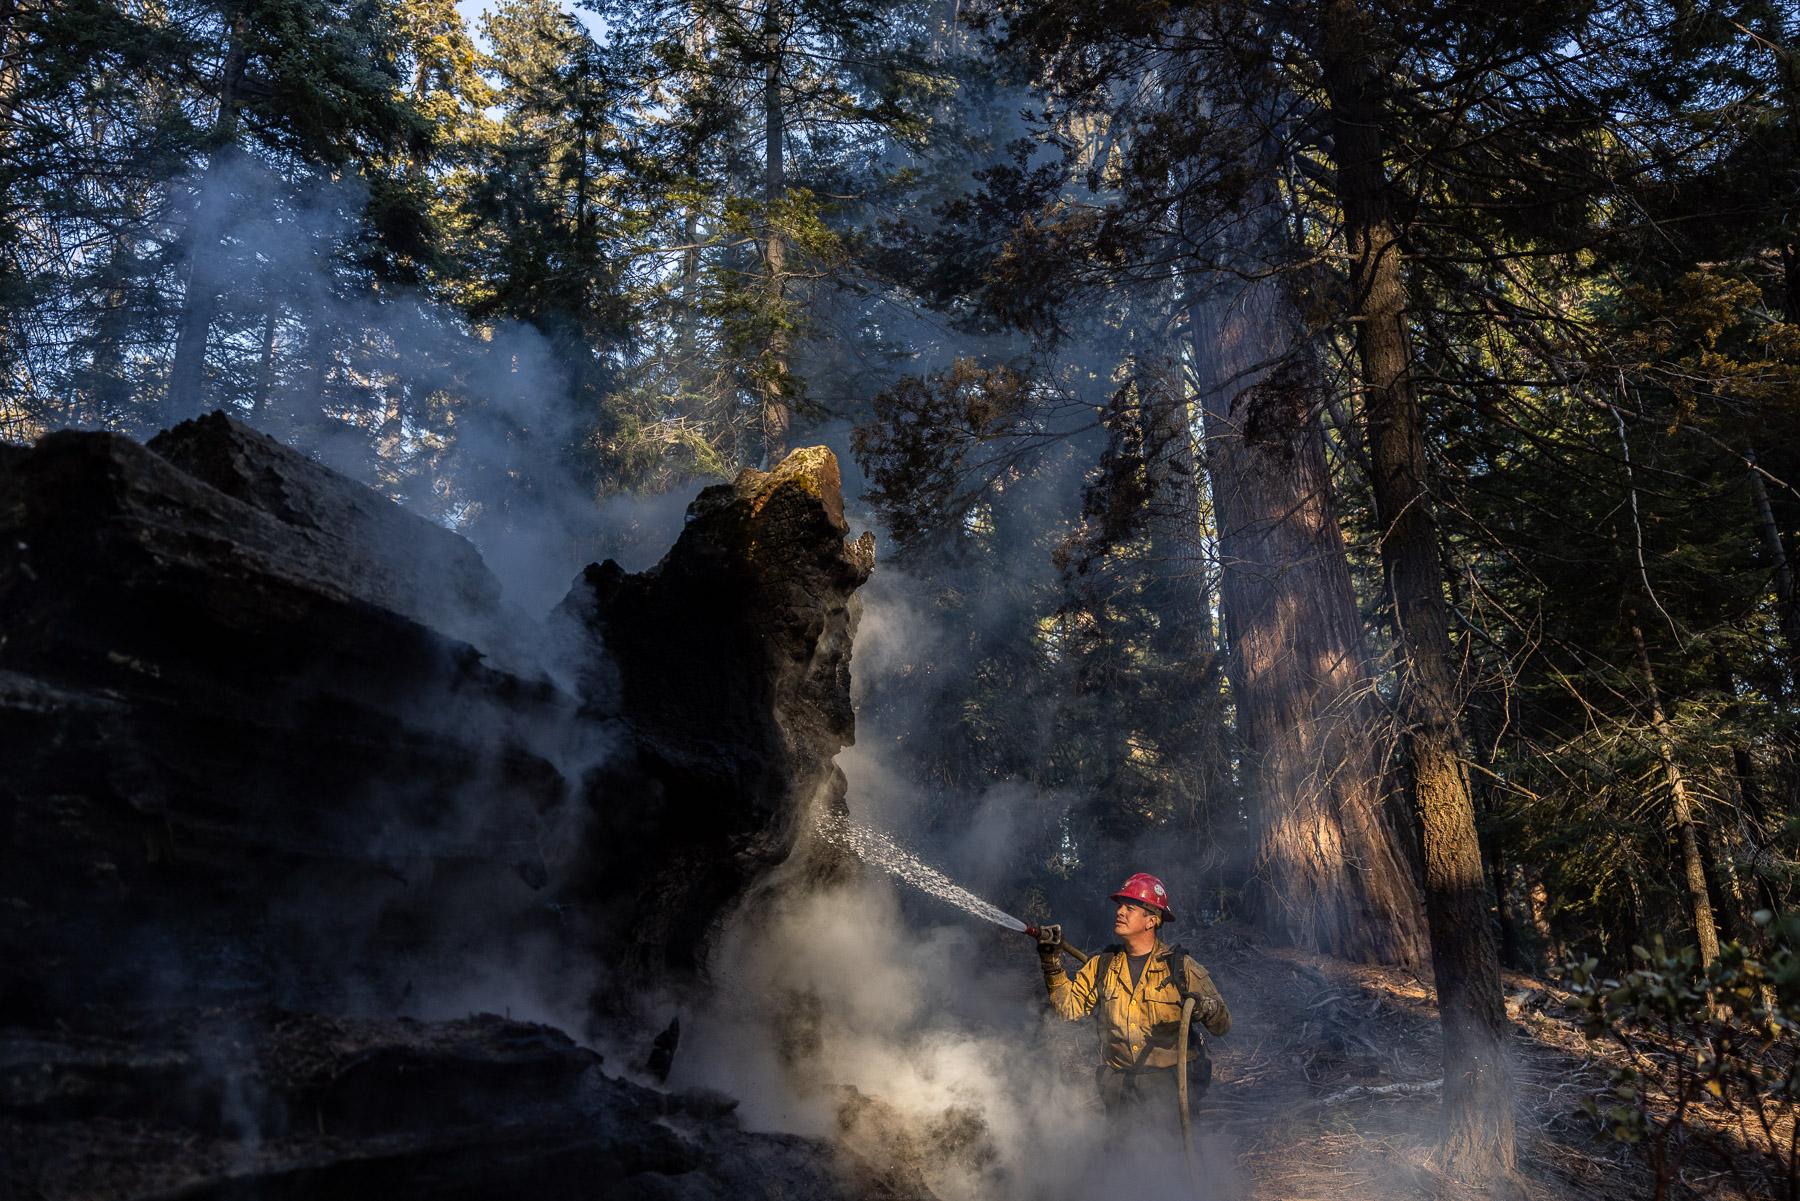 - Sequoia, a year in a burning forest - An old sequoia stomp catches fire.